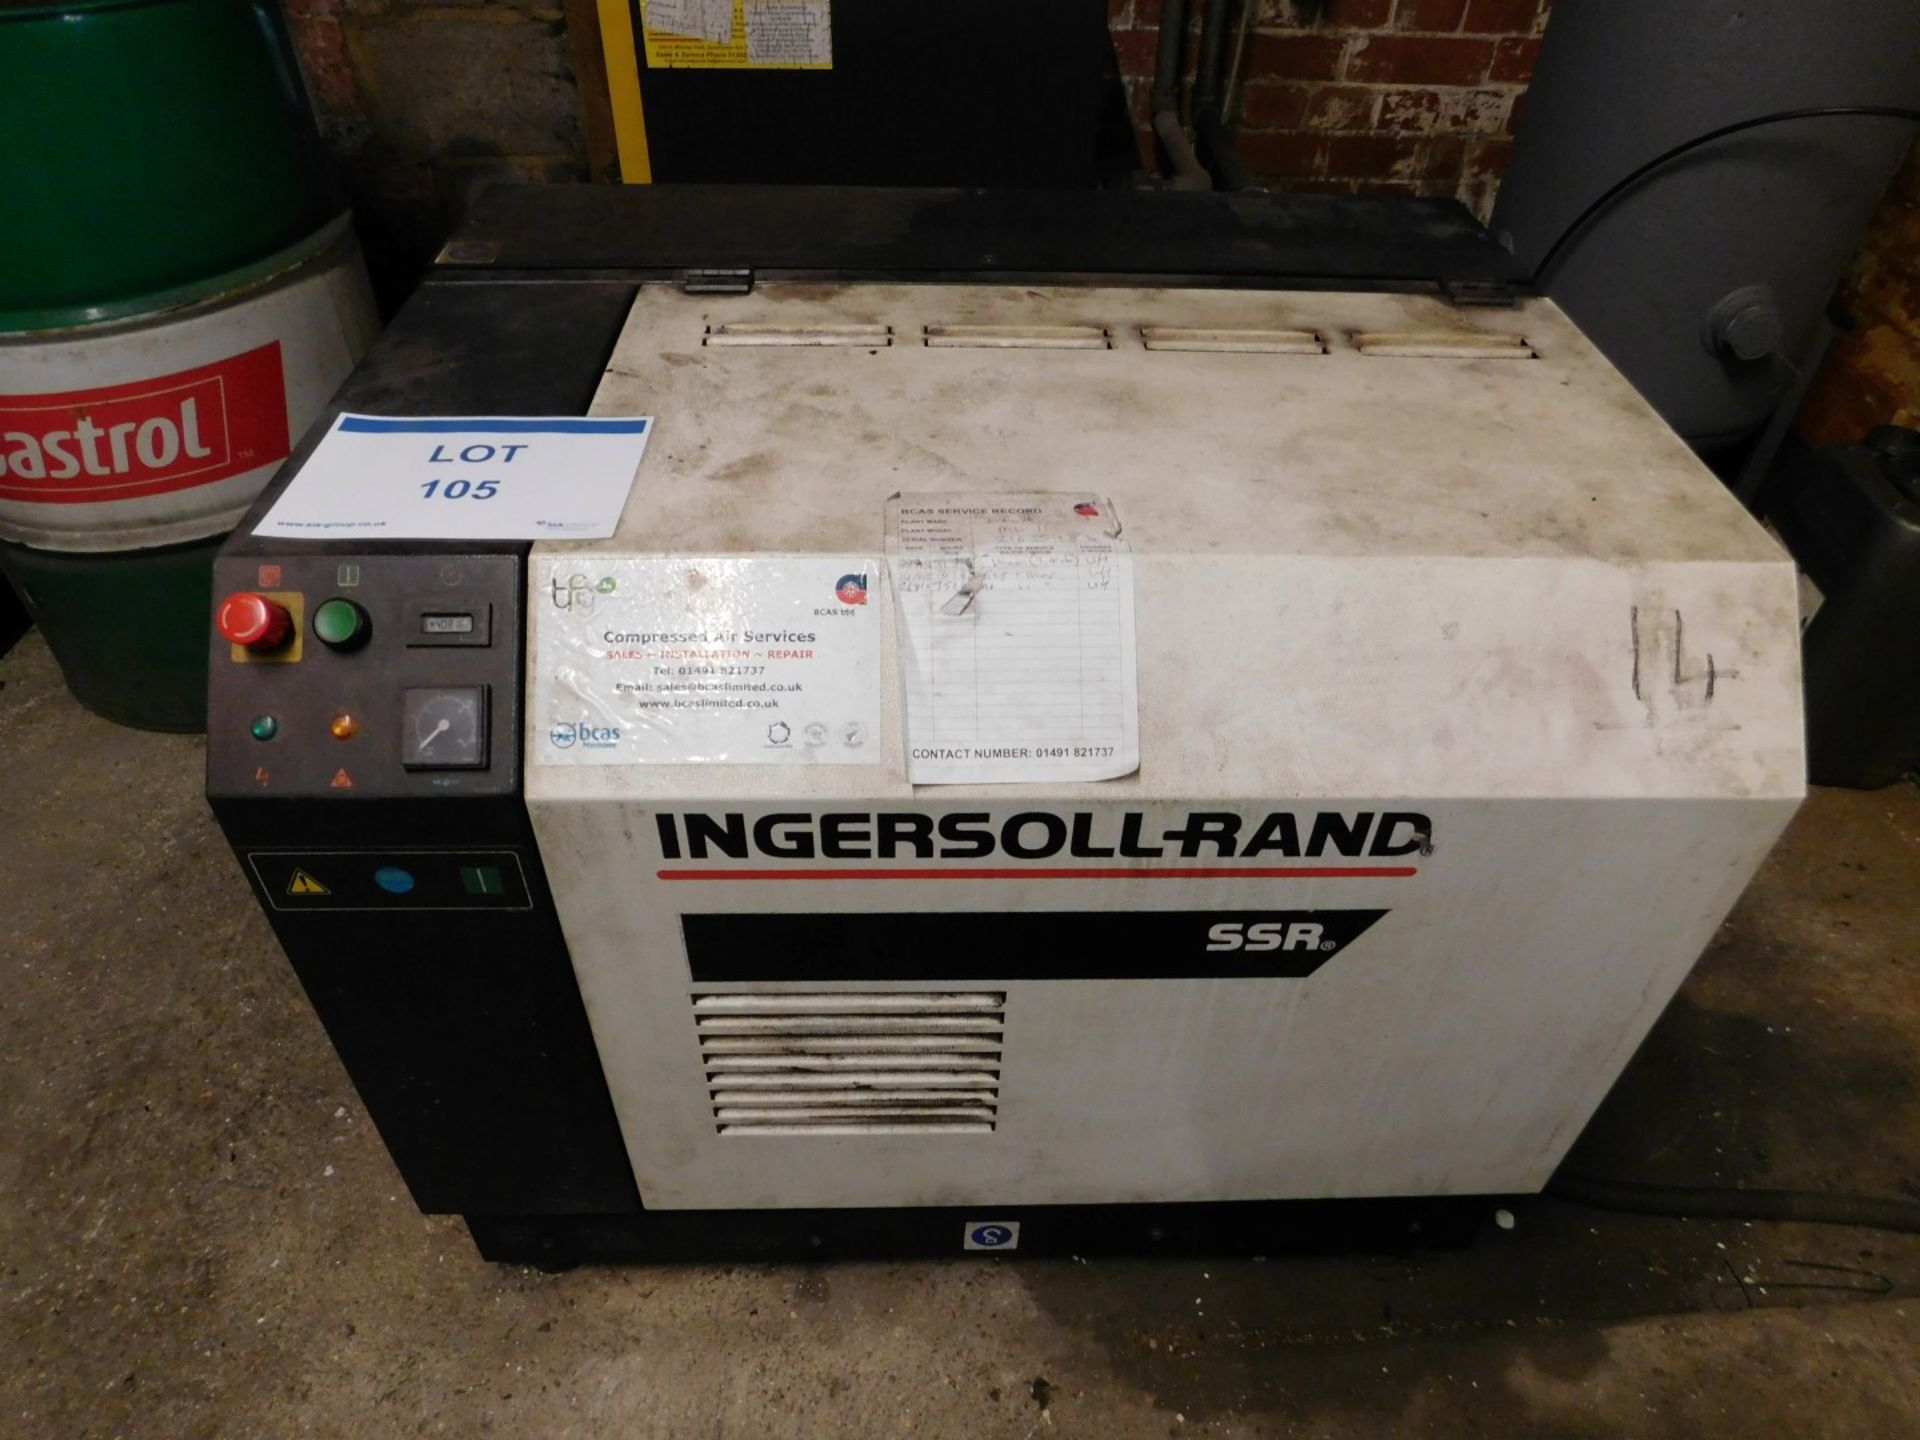 Ingersoll Rand SSR Model ML11 compressed air centre